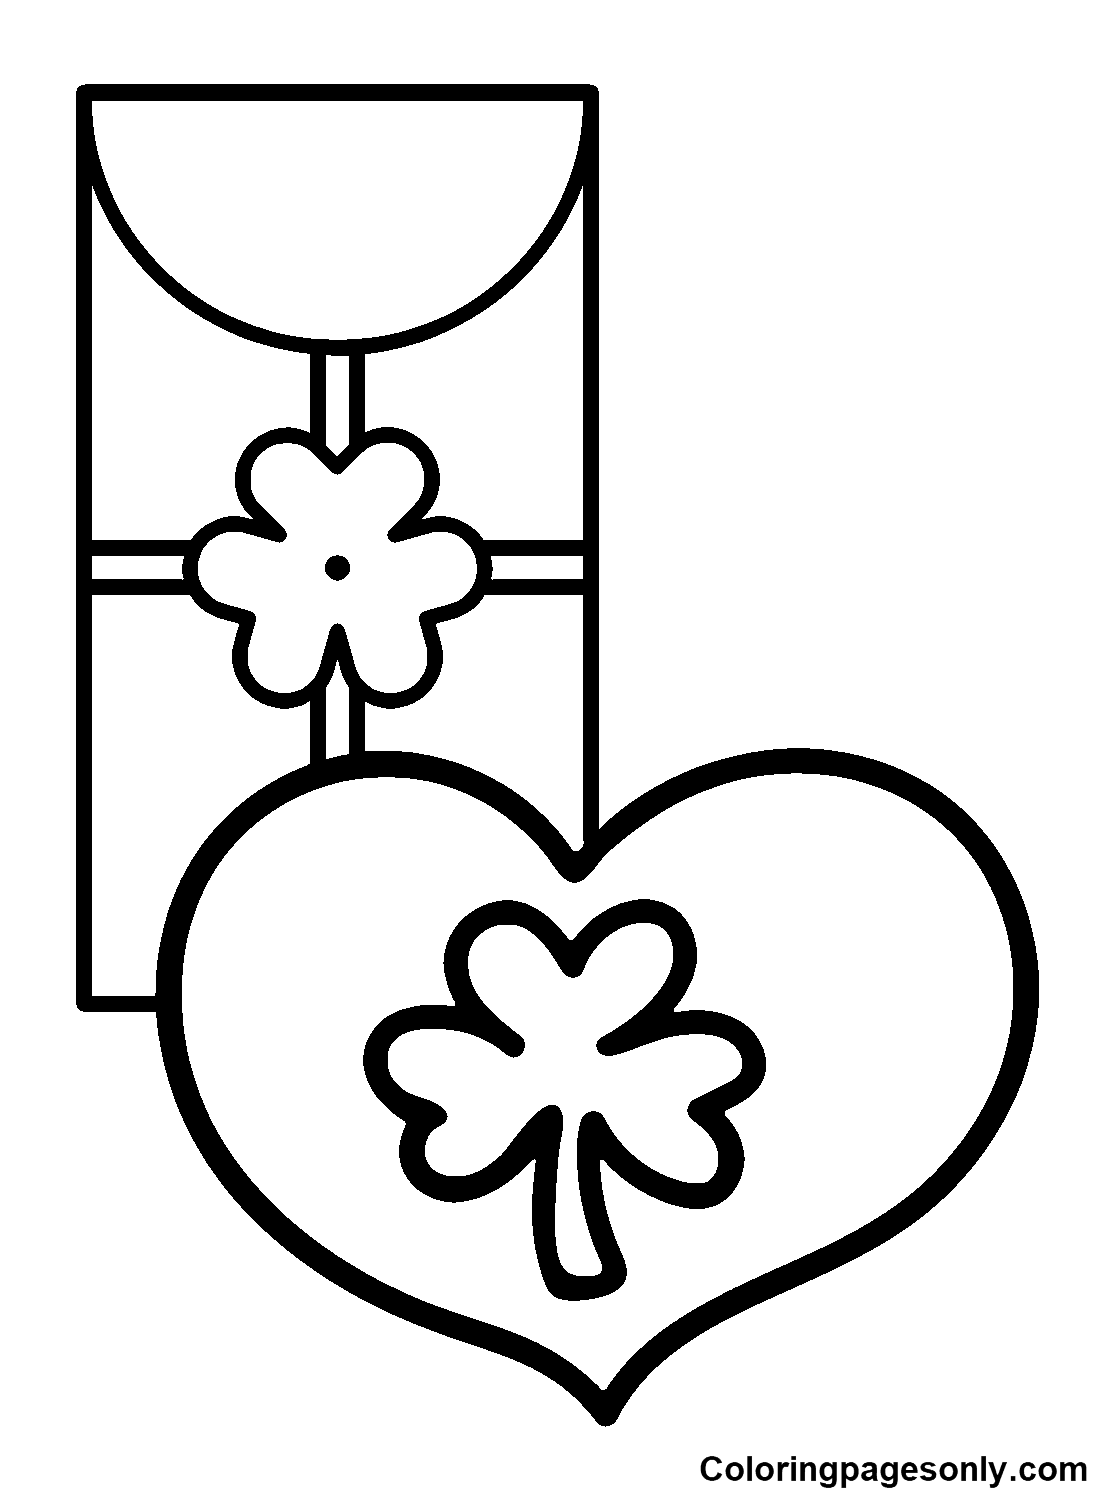 Shamrock with heart Coloring Pages